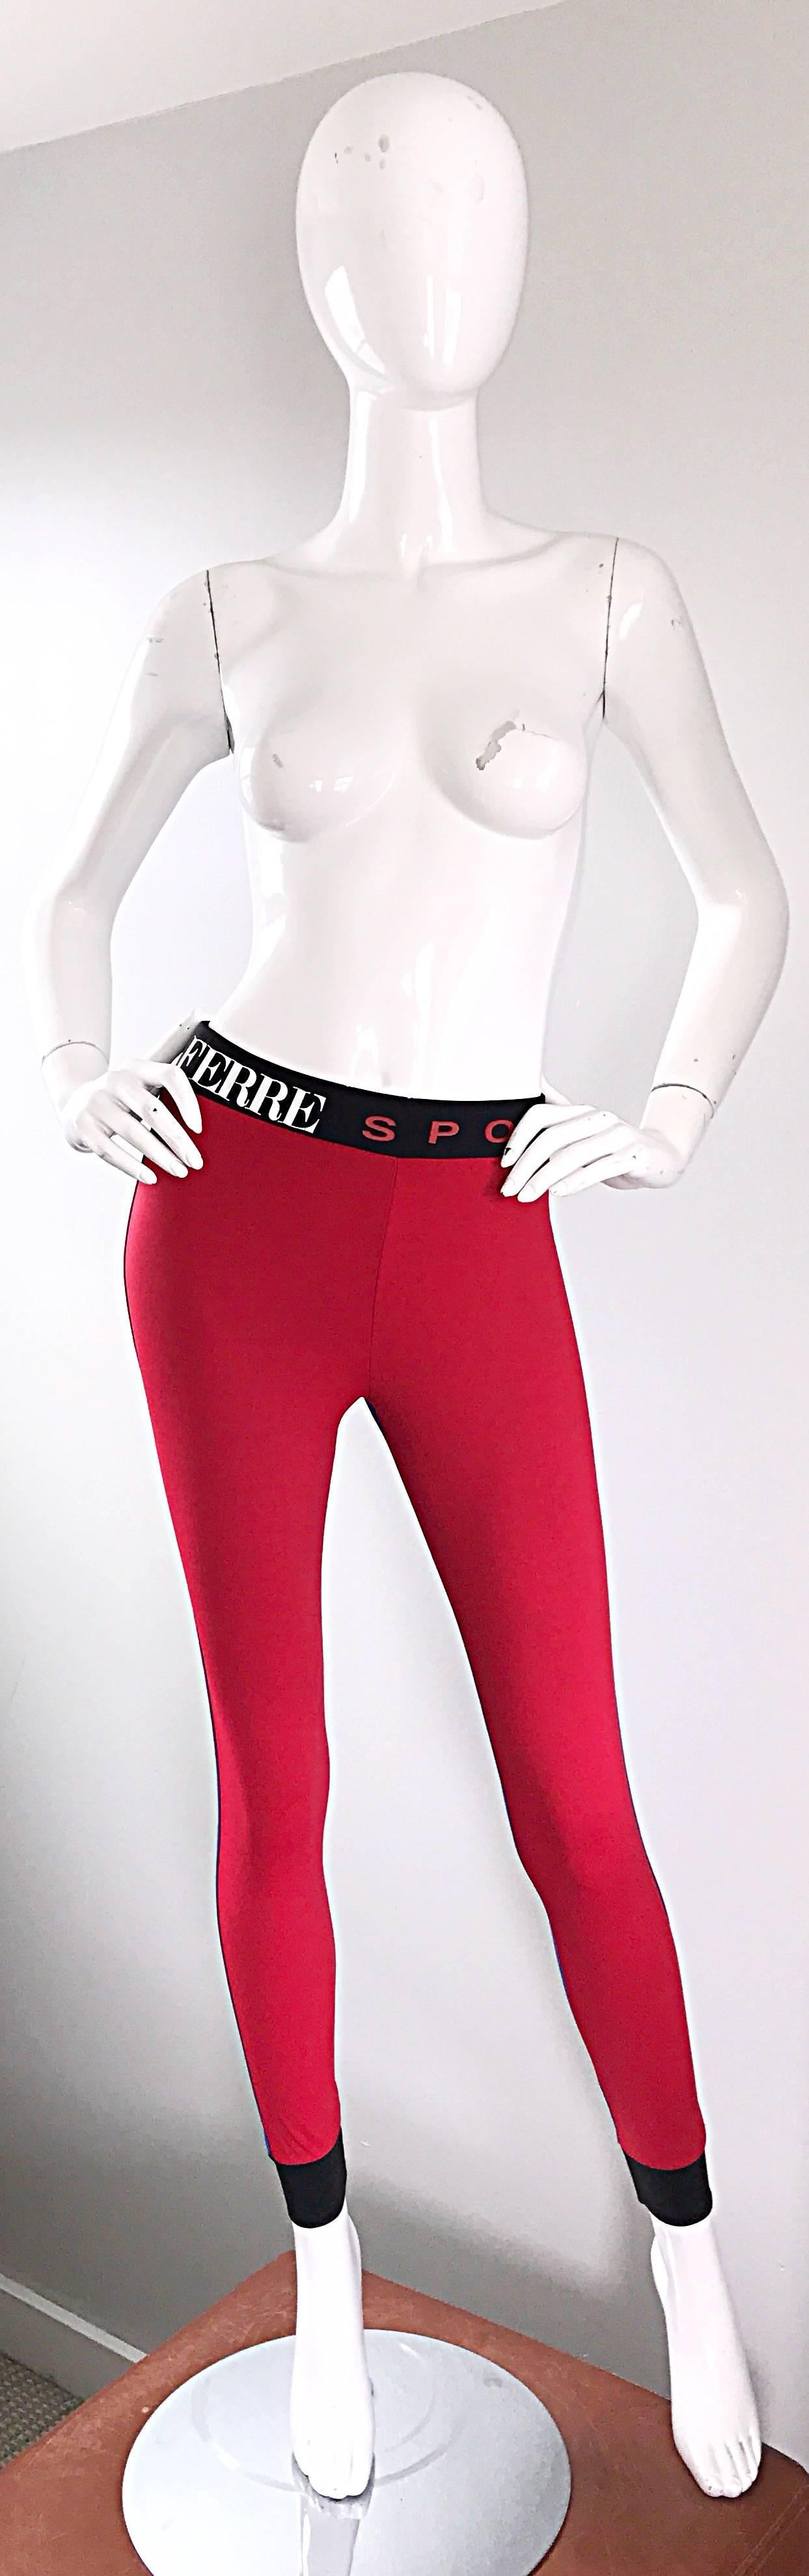 Gianfranco Ferre 1990s Vintage Red and Blue Color Block High Waisted Leggings For Sale 2